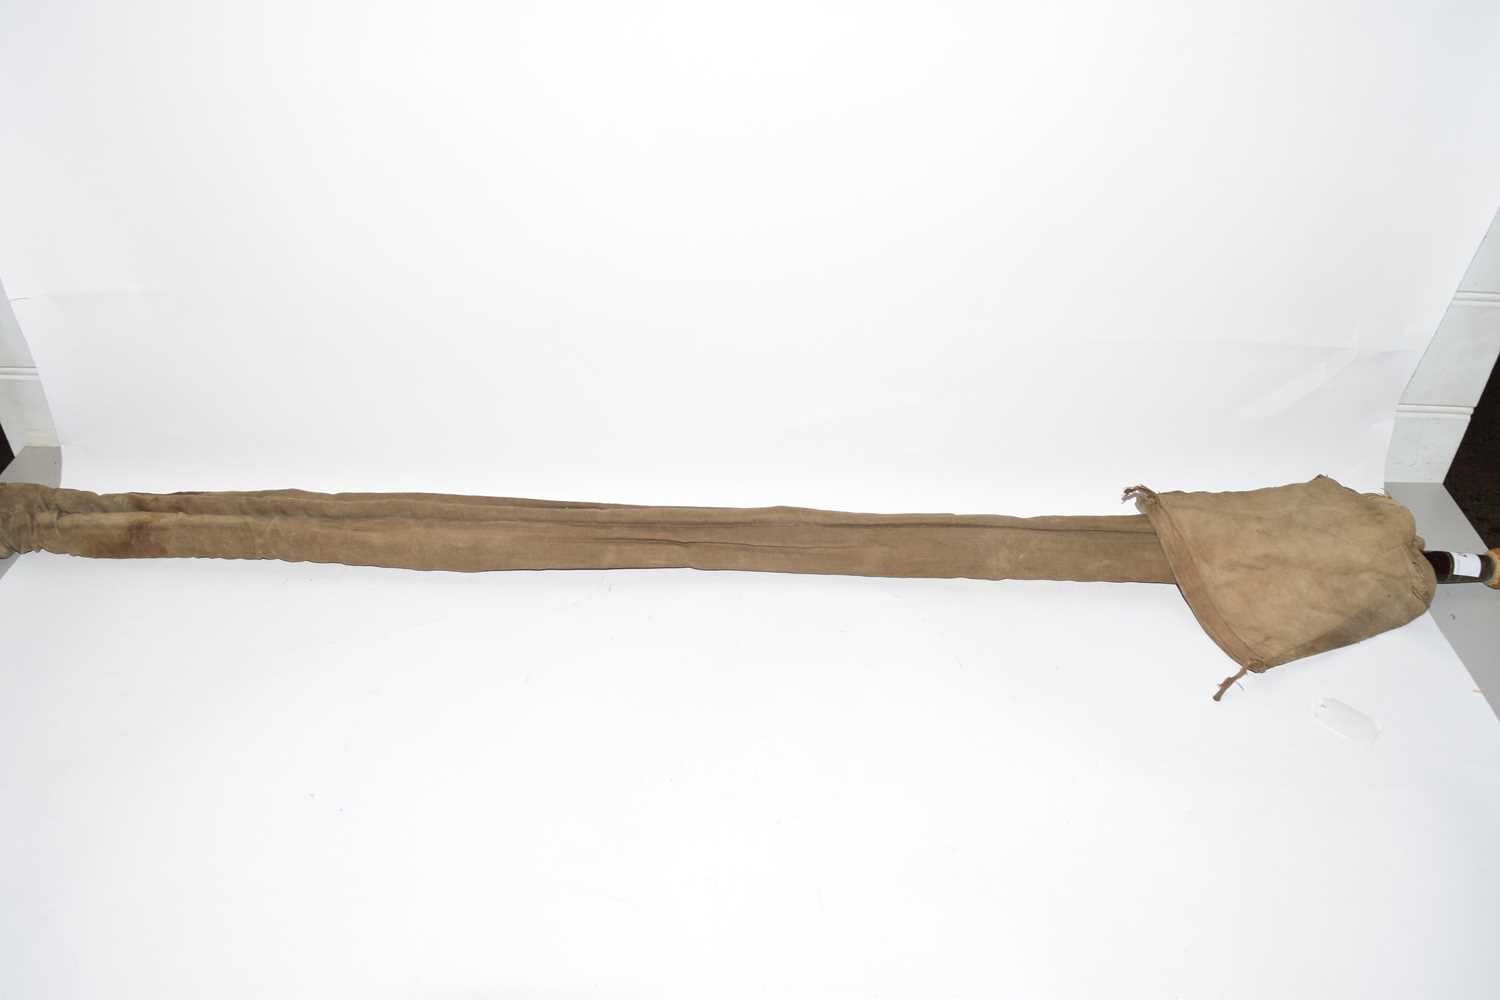 19th/20th century 2-part wooden fly-fishing rod with a cork handle, turned wooden pommel and brass